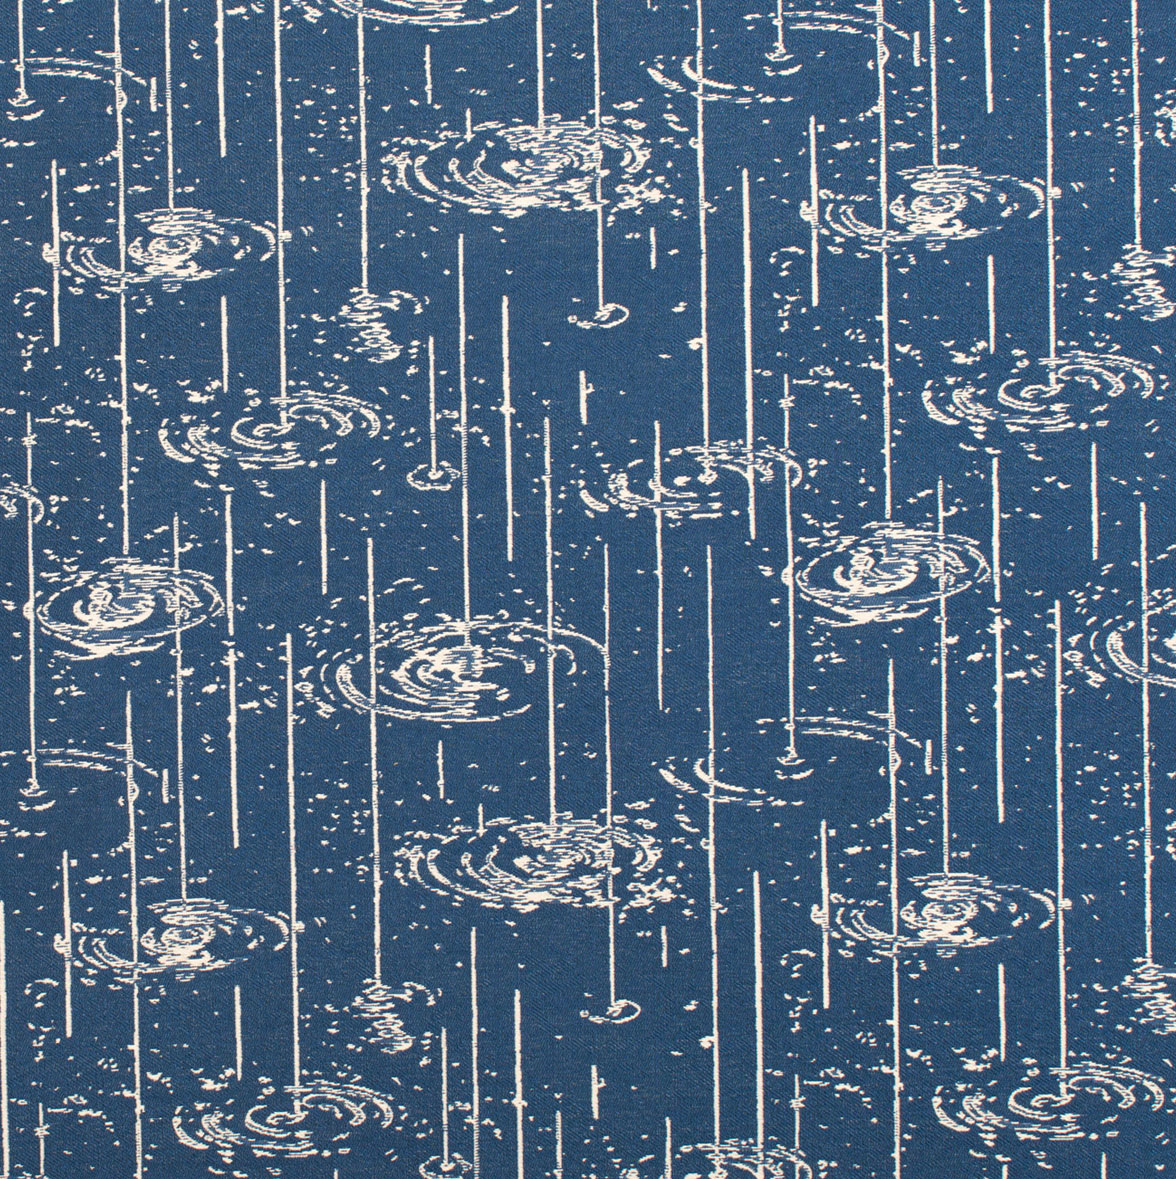 Kevin Zucker 00 PT's textile design inspired by raindrops